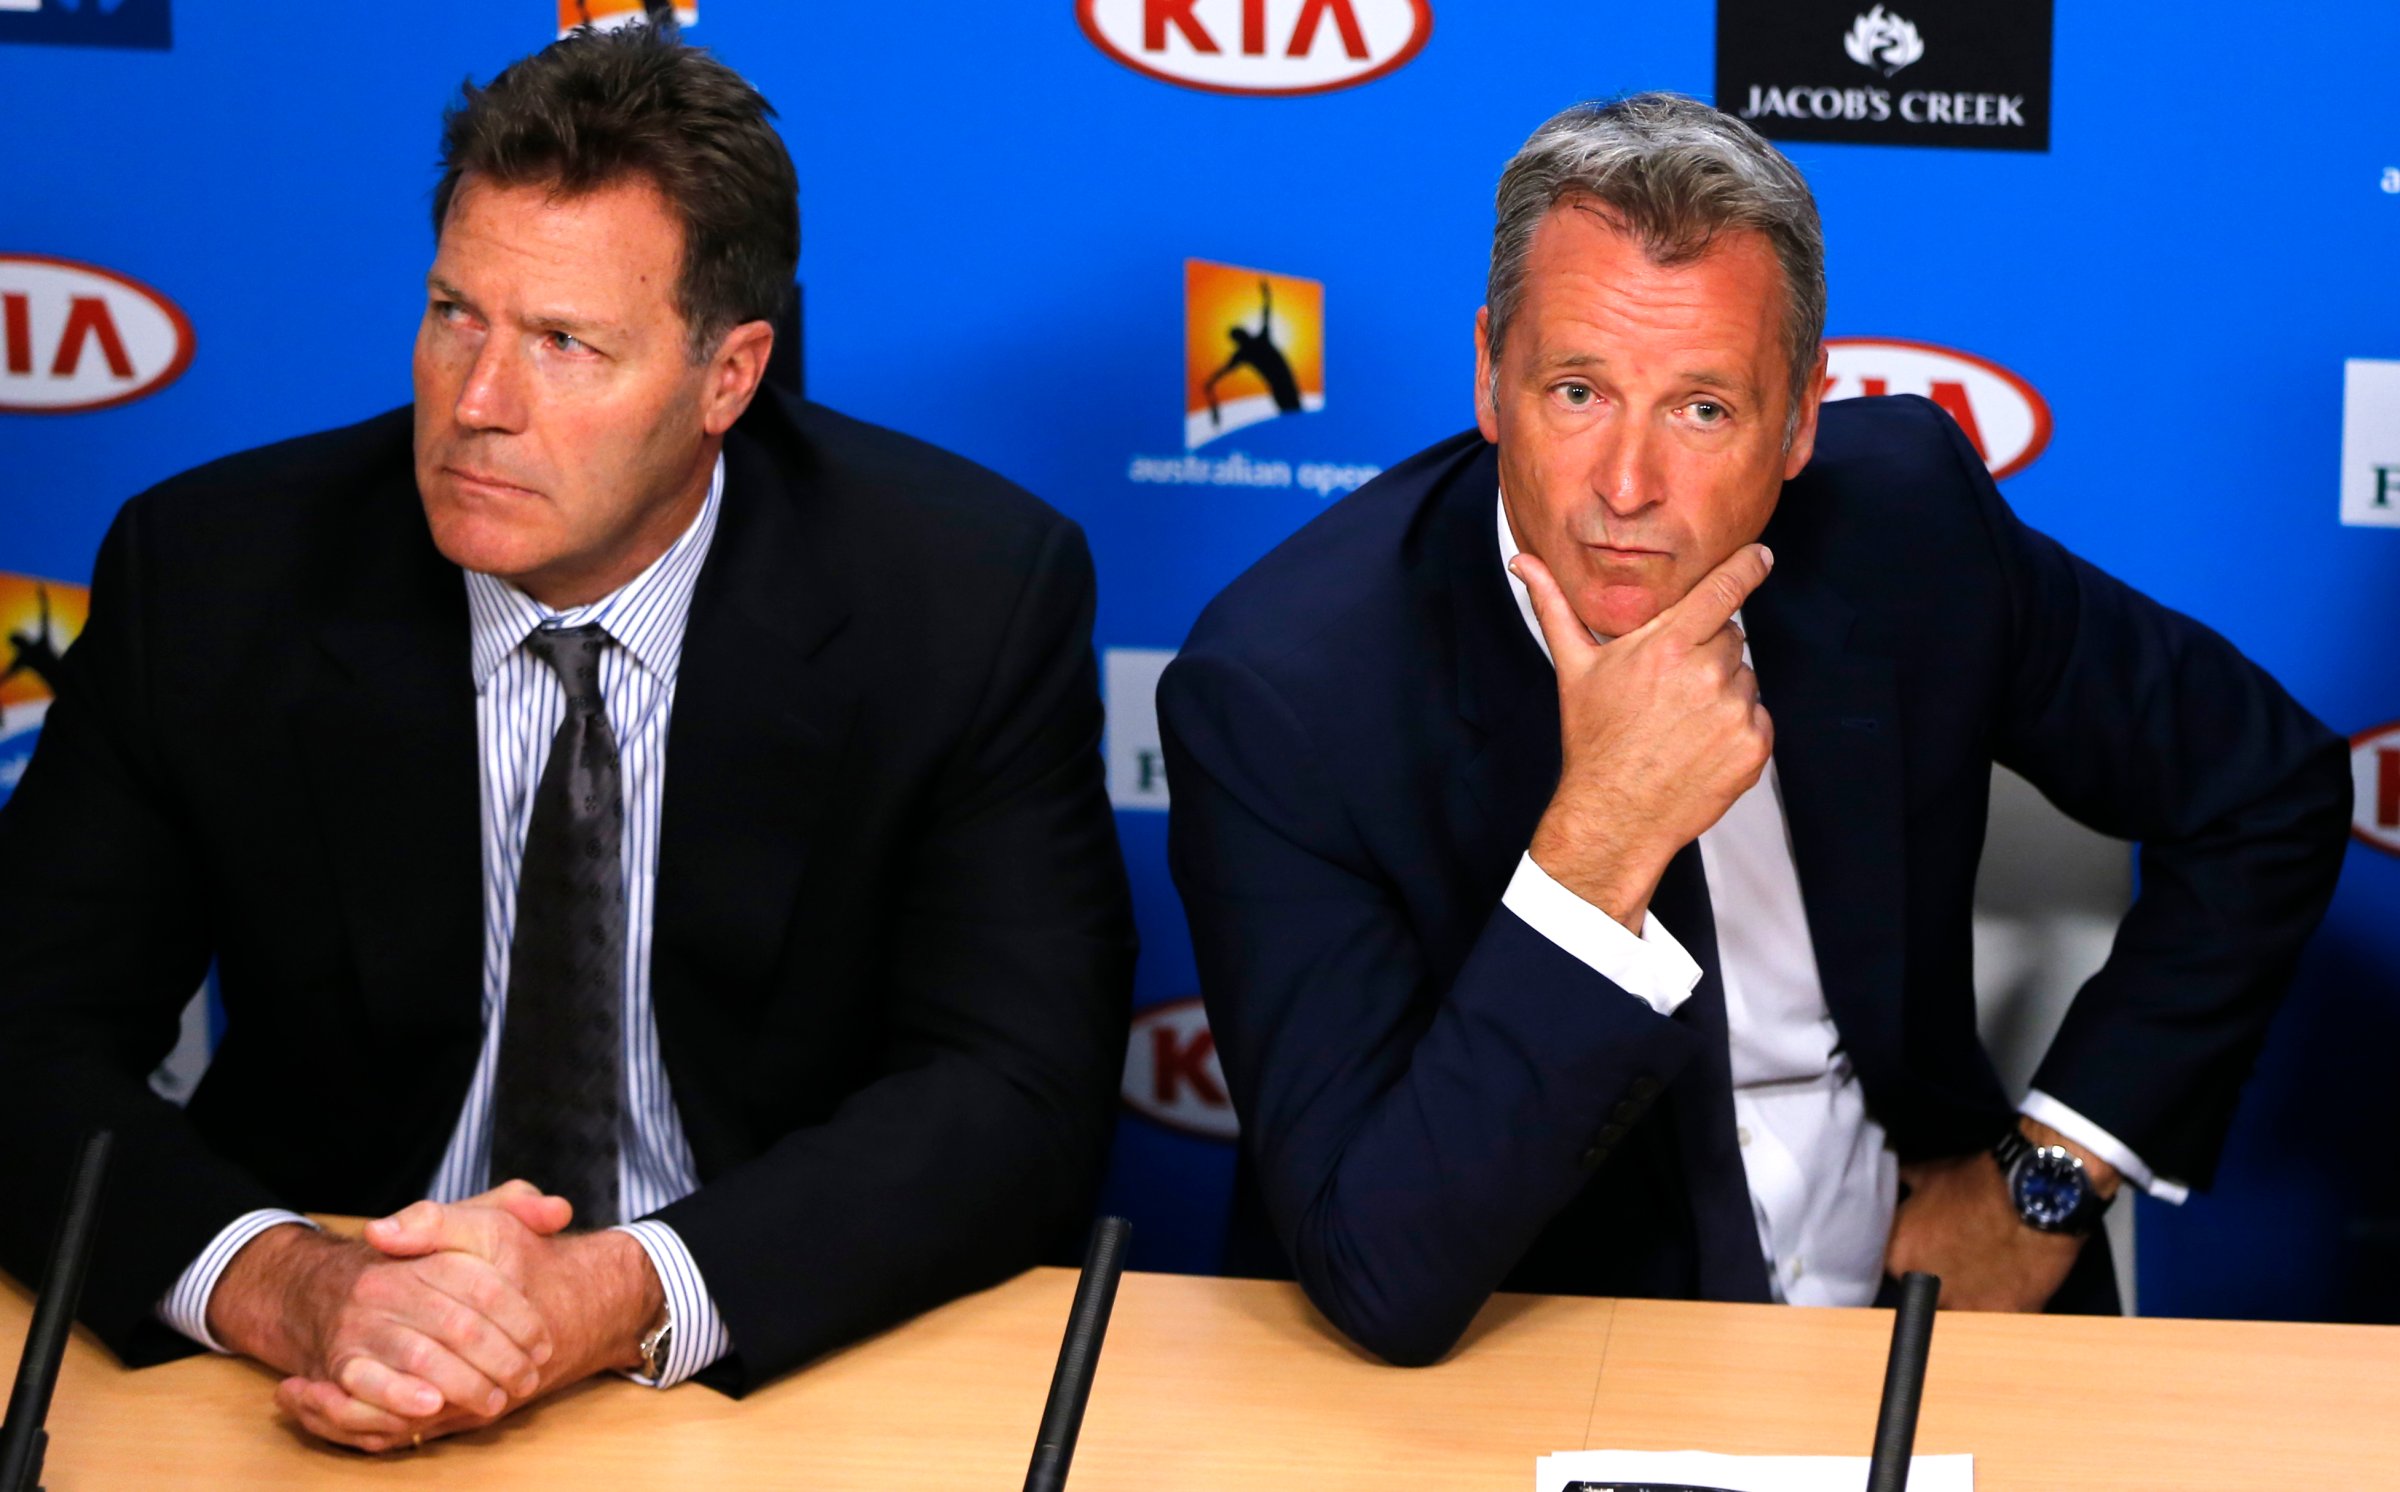 ATP chairman Chris Kermode and vice chairman Mark Young listen to reporter's question during a press conference at the Australian Open tennis championships in Melbourne, Australia on Jan. 18, 2016.